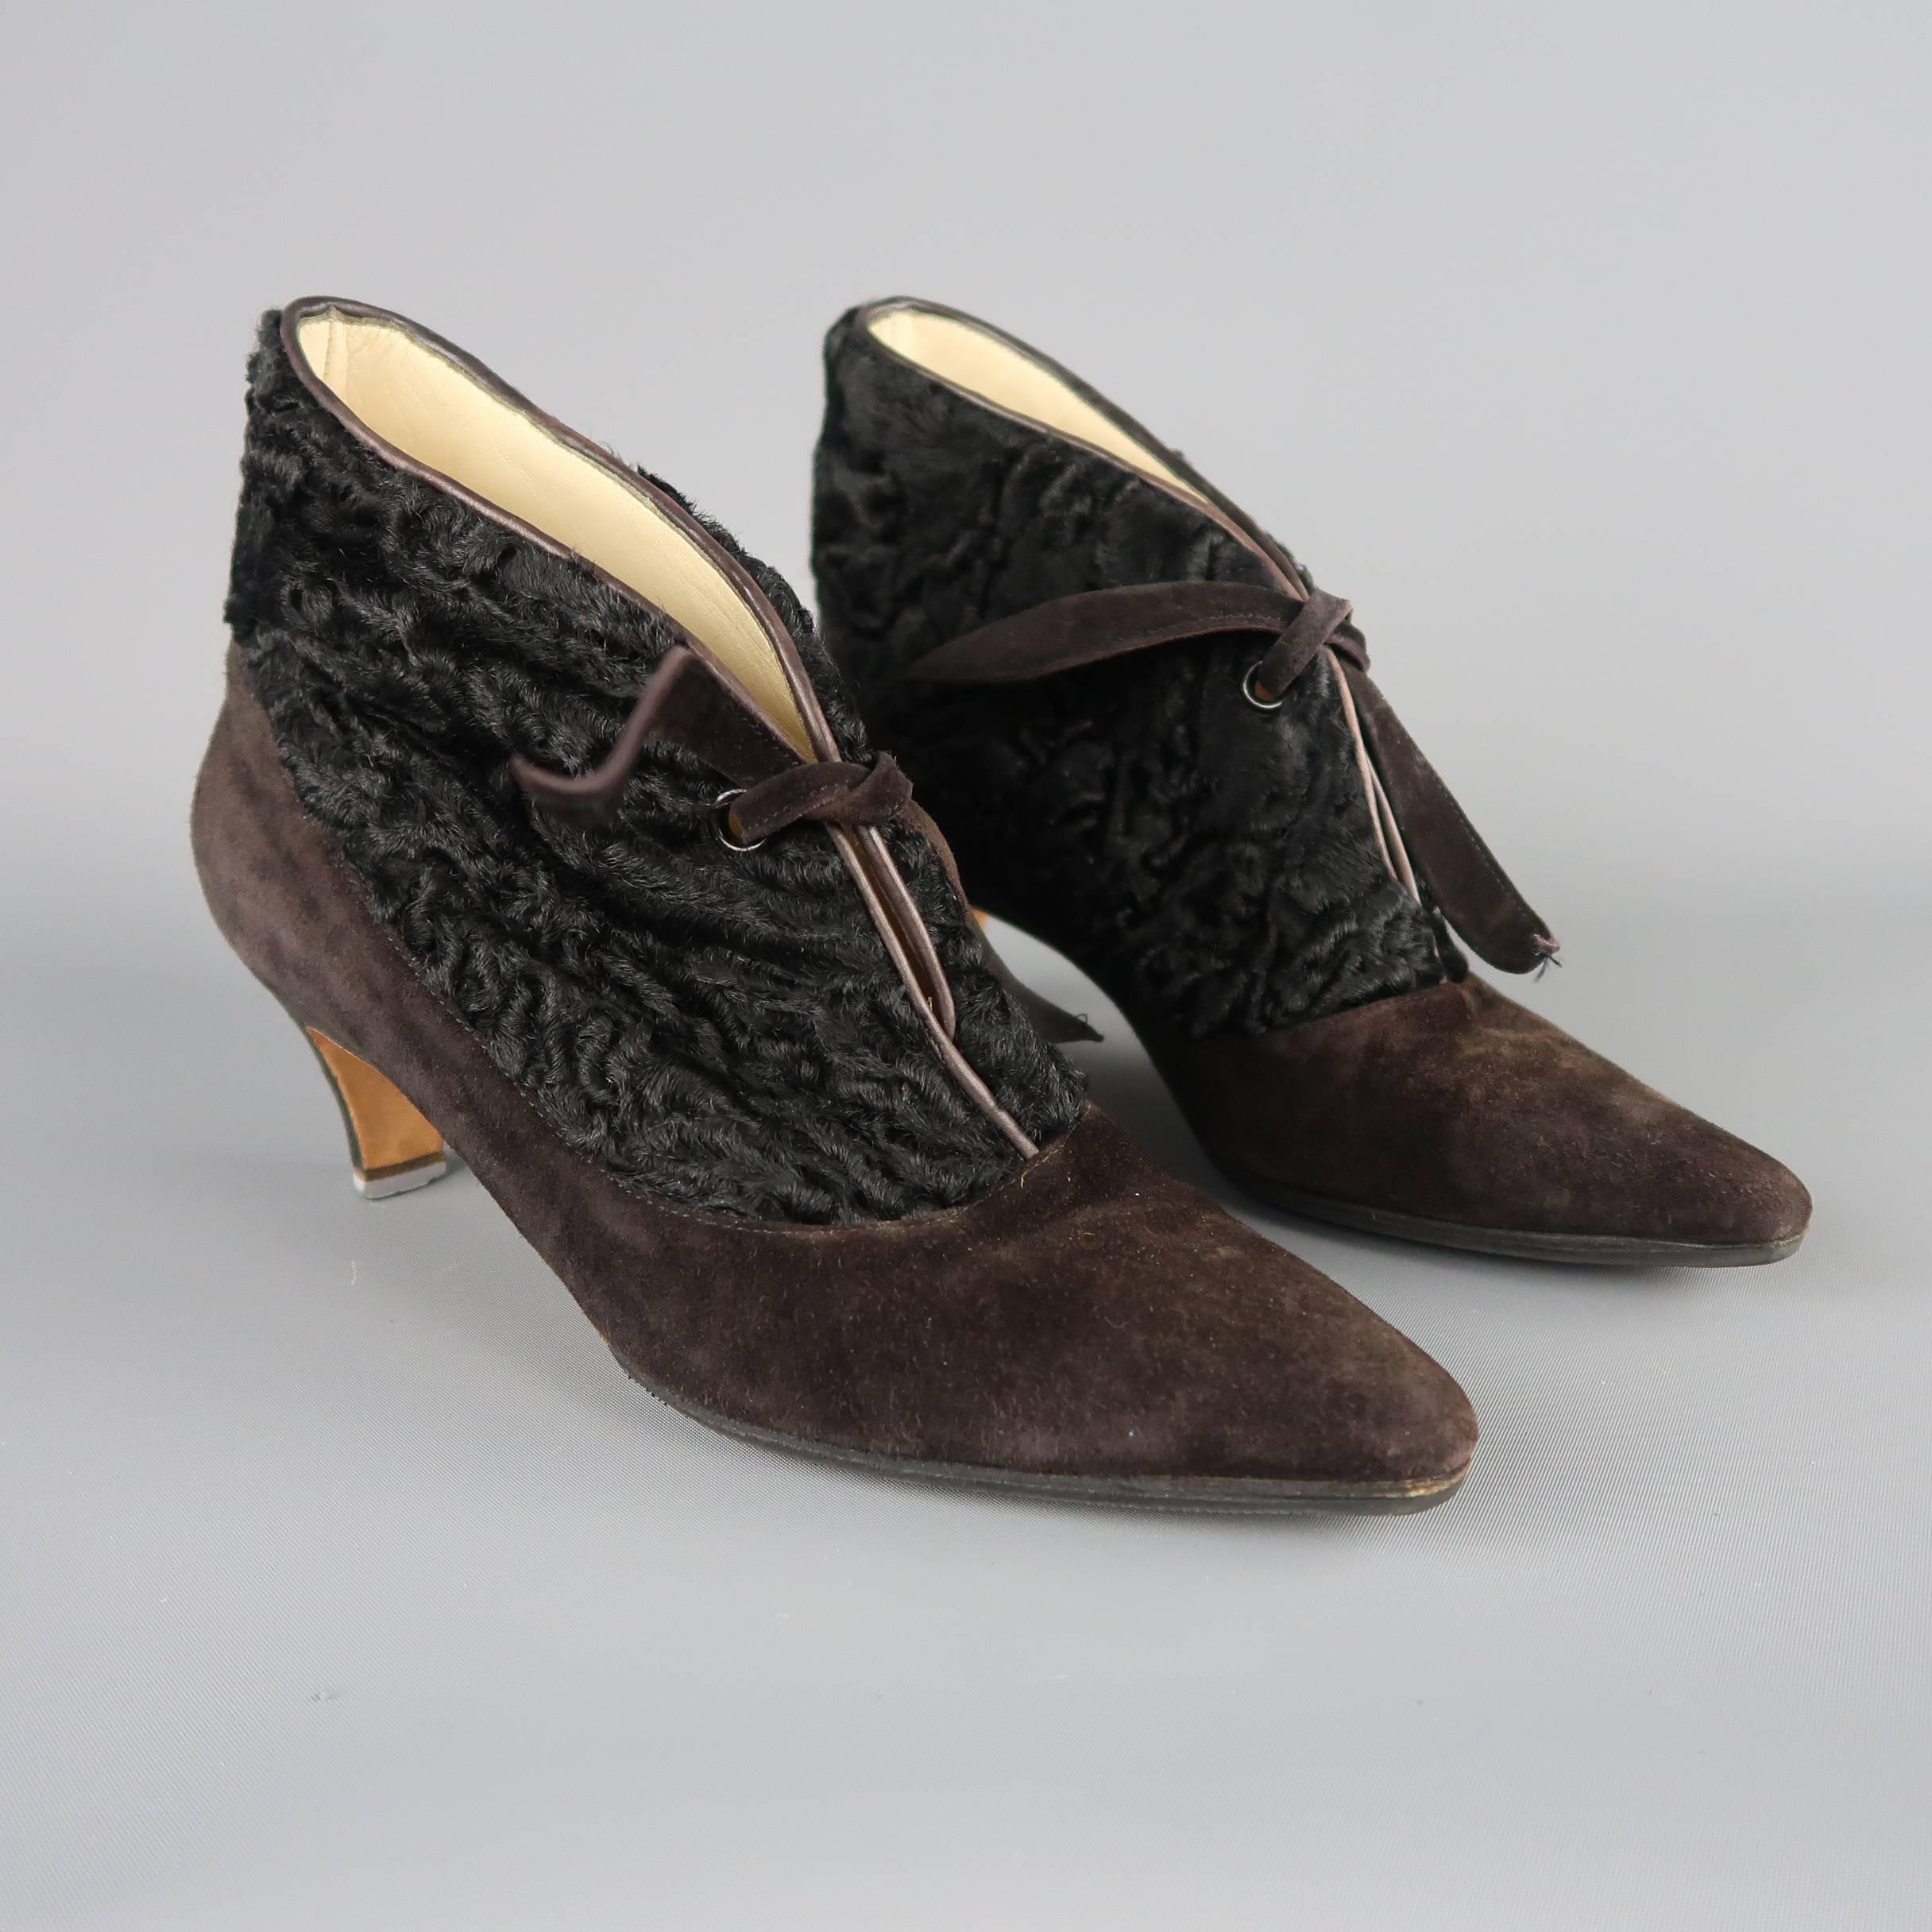 Vintage Manolo Blahnik booties come in brown suede with  a pointed toe, covered kitten heel, toed front, and black Karakul Lamb fur panel. Wear throughout. As-is. Made in Italy.
 
Fair Pre-Owned Condition.
Marked: IT 37
 
Measurements:
 
Heel: 2 in.
